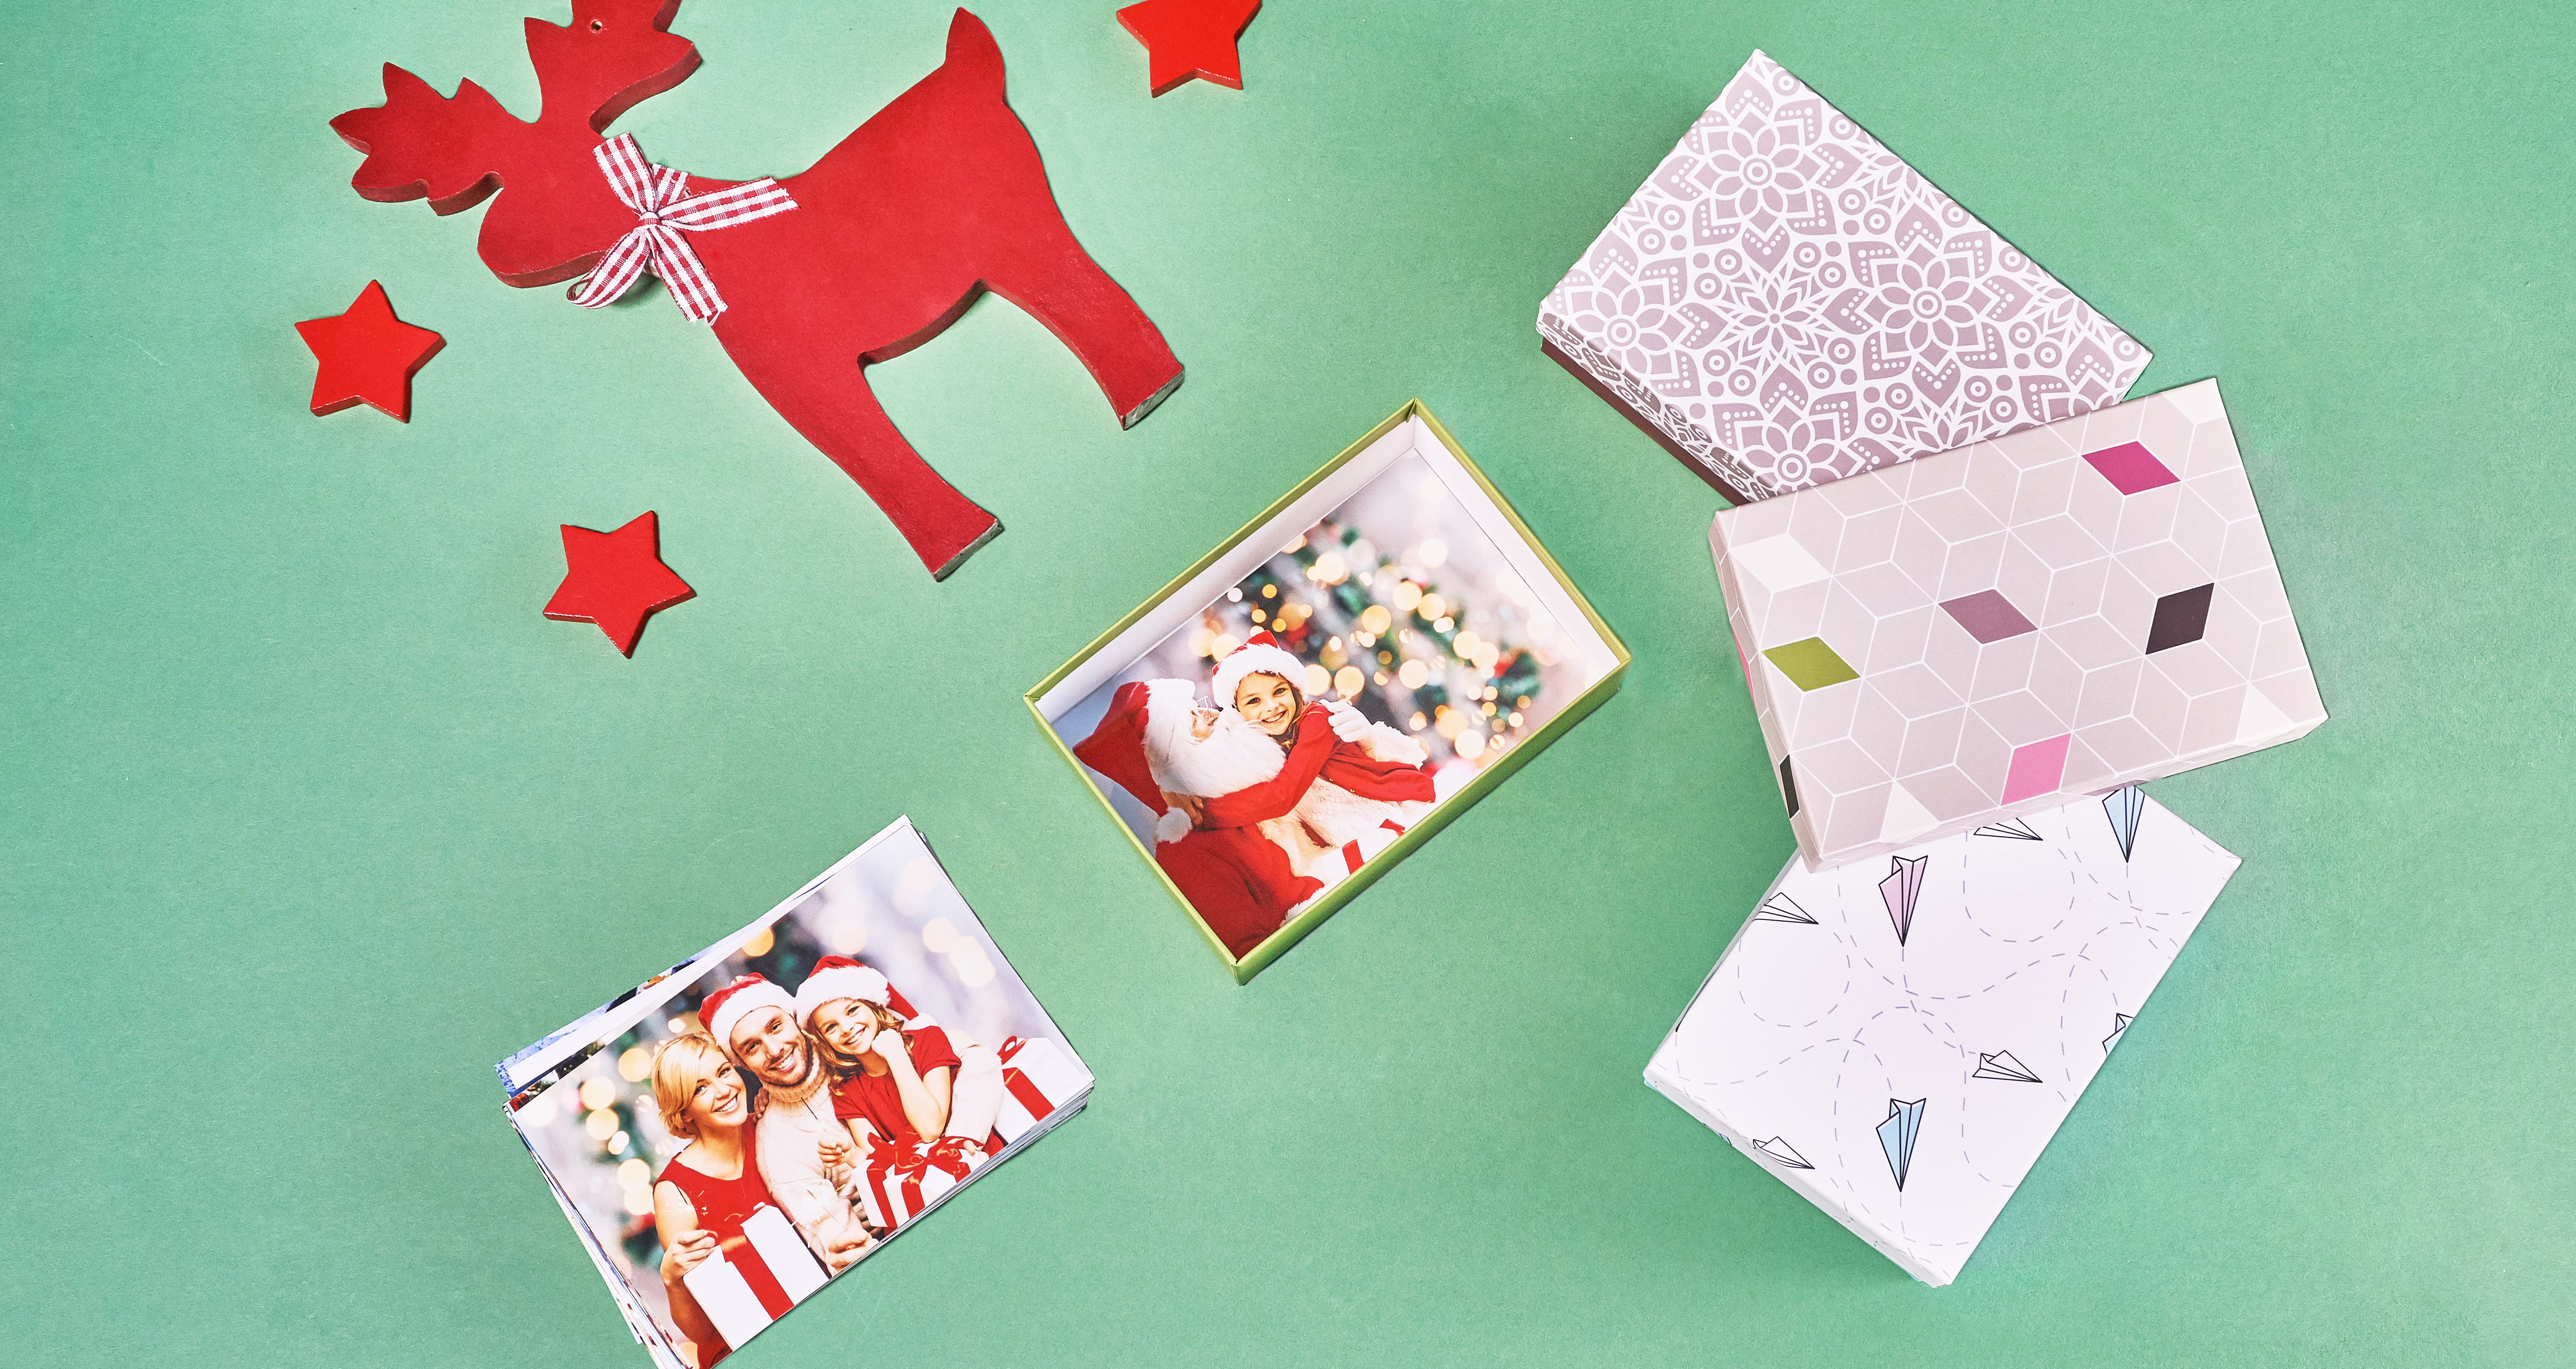 Classic prints in a decorative box and photos places in a pile. 3 decorative boxes for prints on the right side, a red wooden reindeer and stars above. All products are placed on a green background. 	